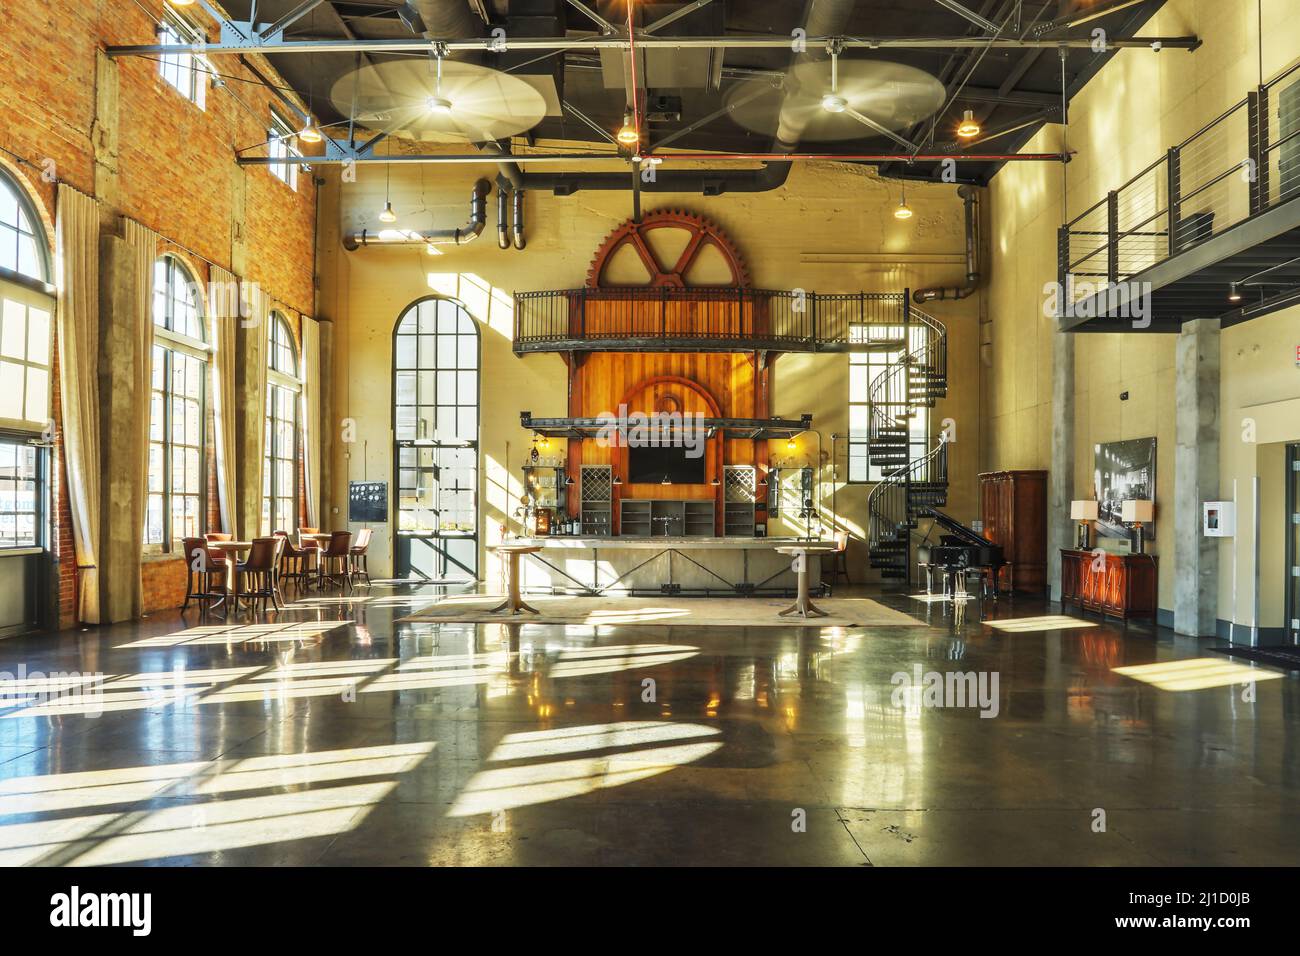 The Steam Plant. Interior of a restored historical utility building now used for events. Includes a view of the bar at then end of the room. The Steam Stock Photo